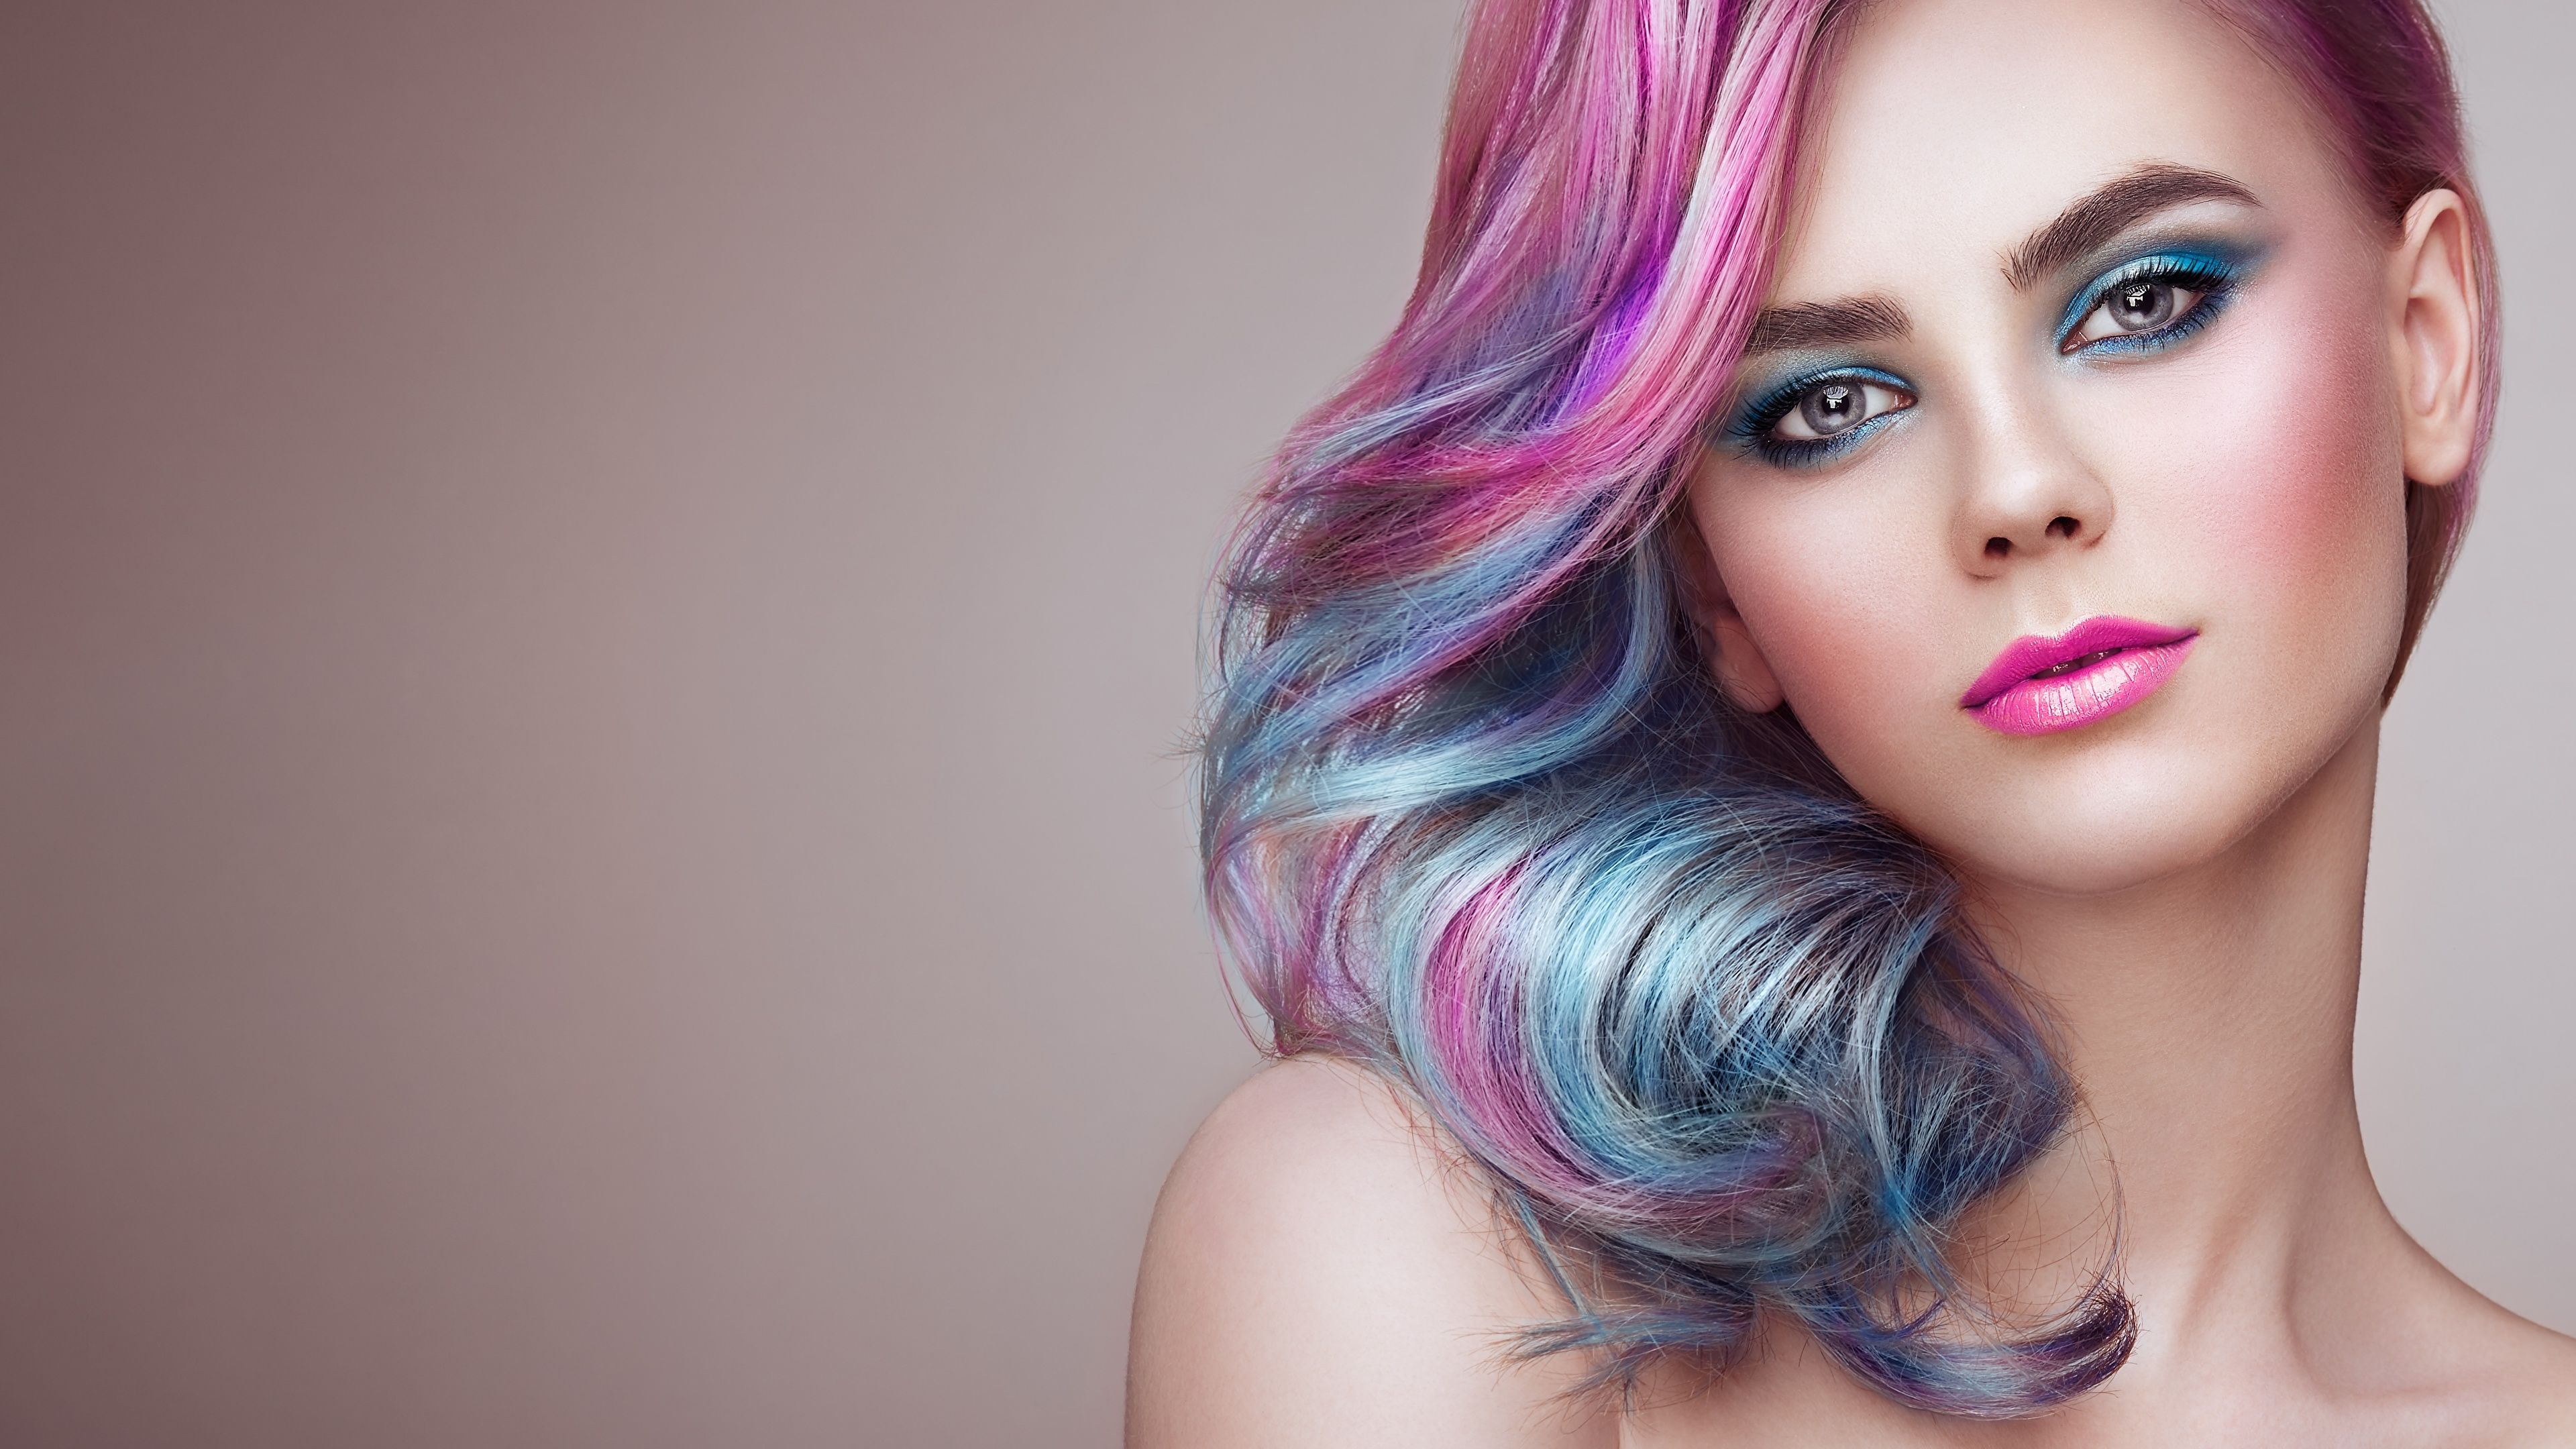 Hair Style Wallpaper Free Hair Style Background